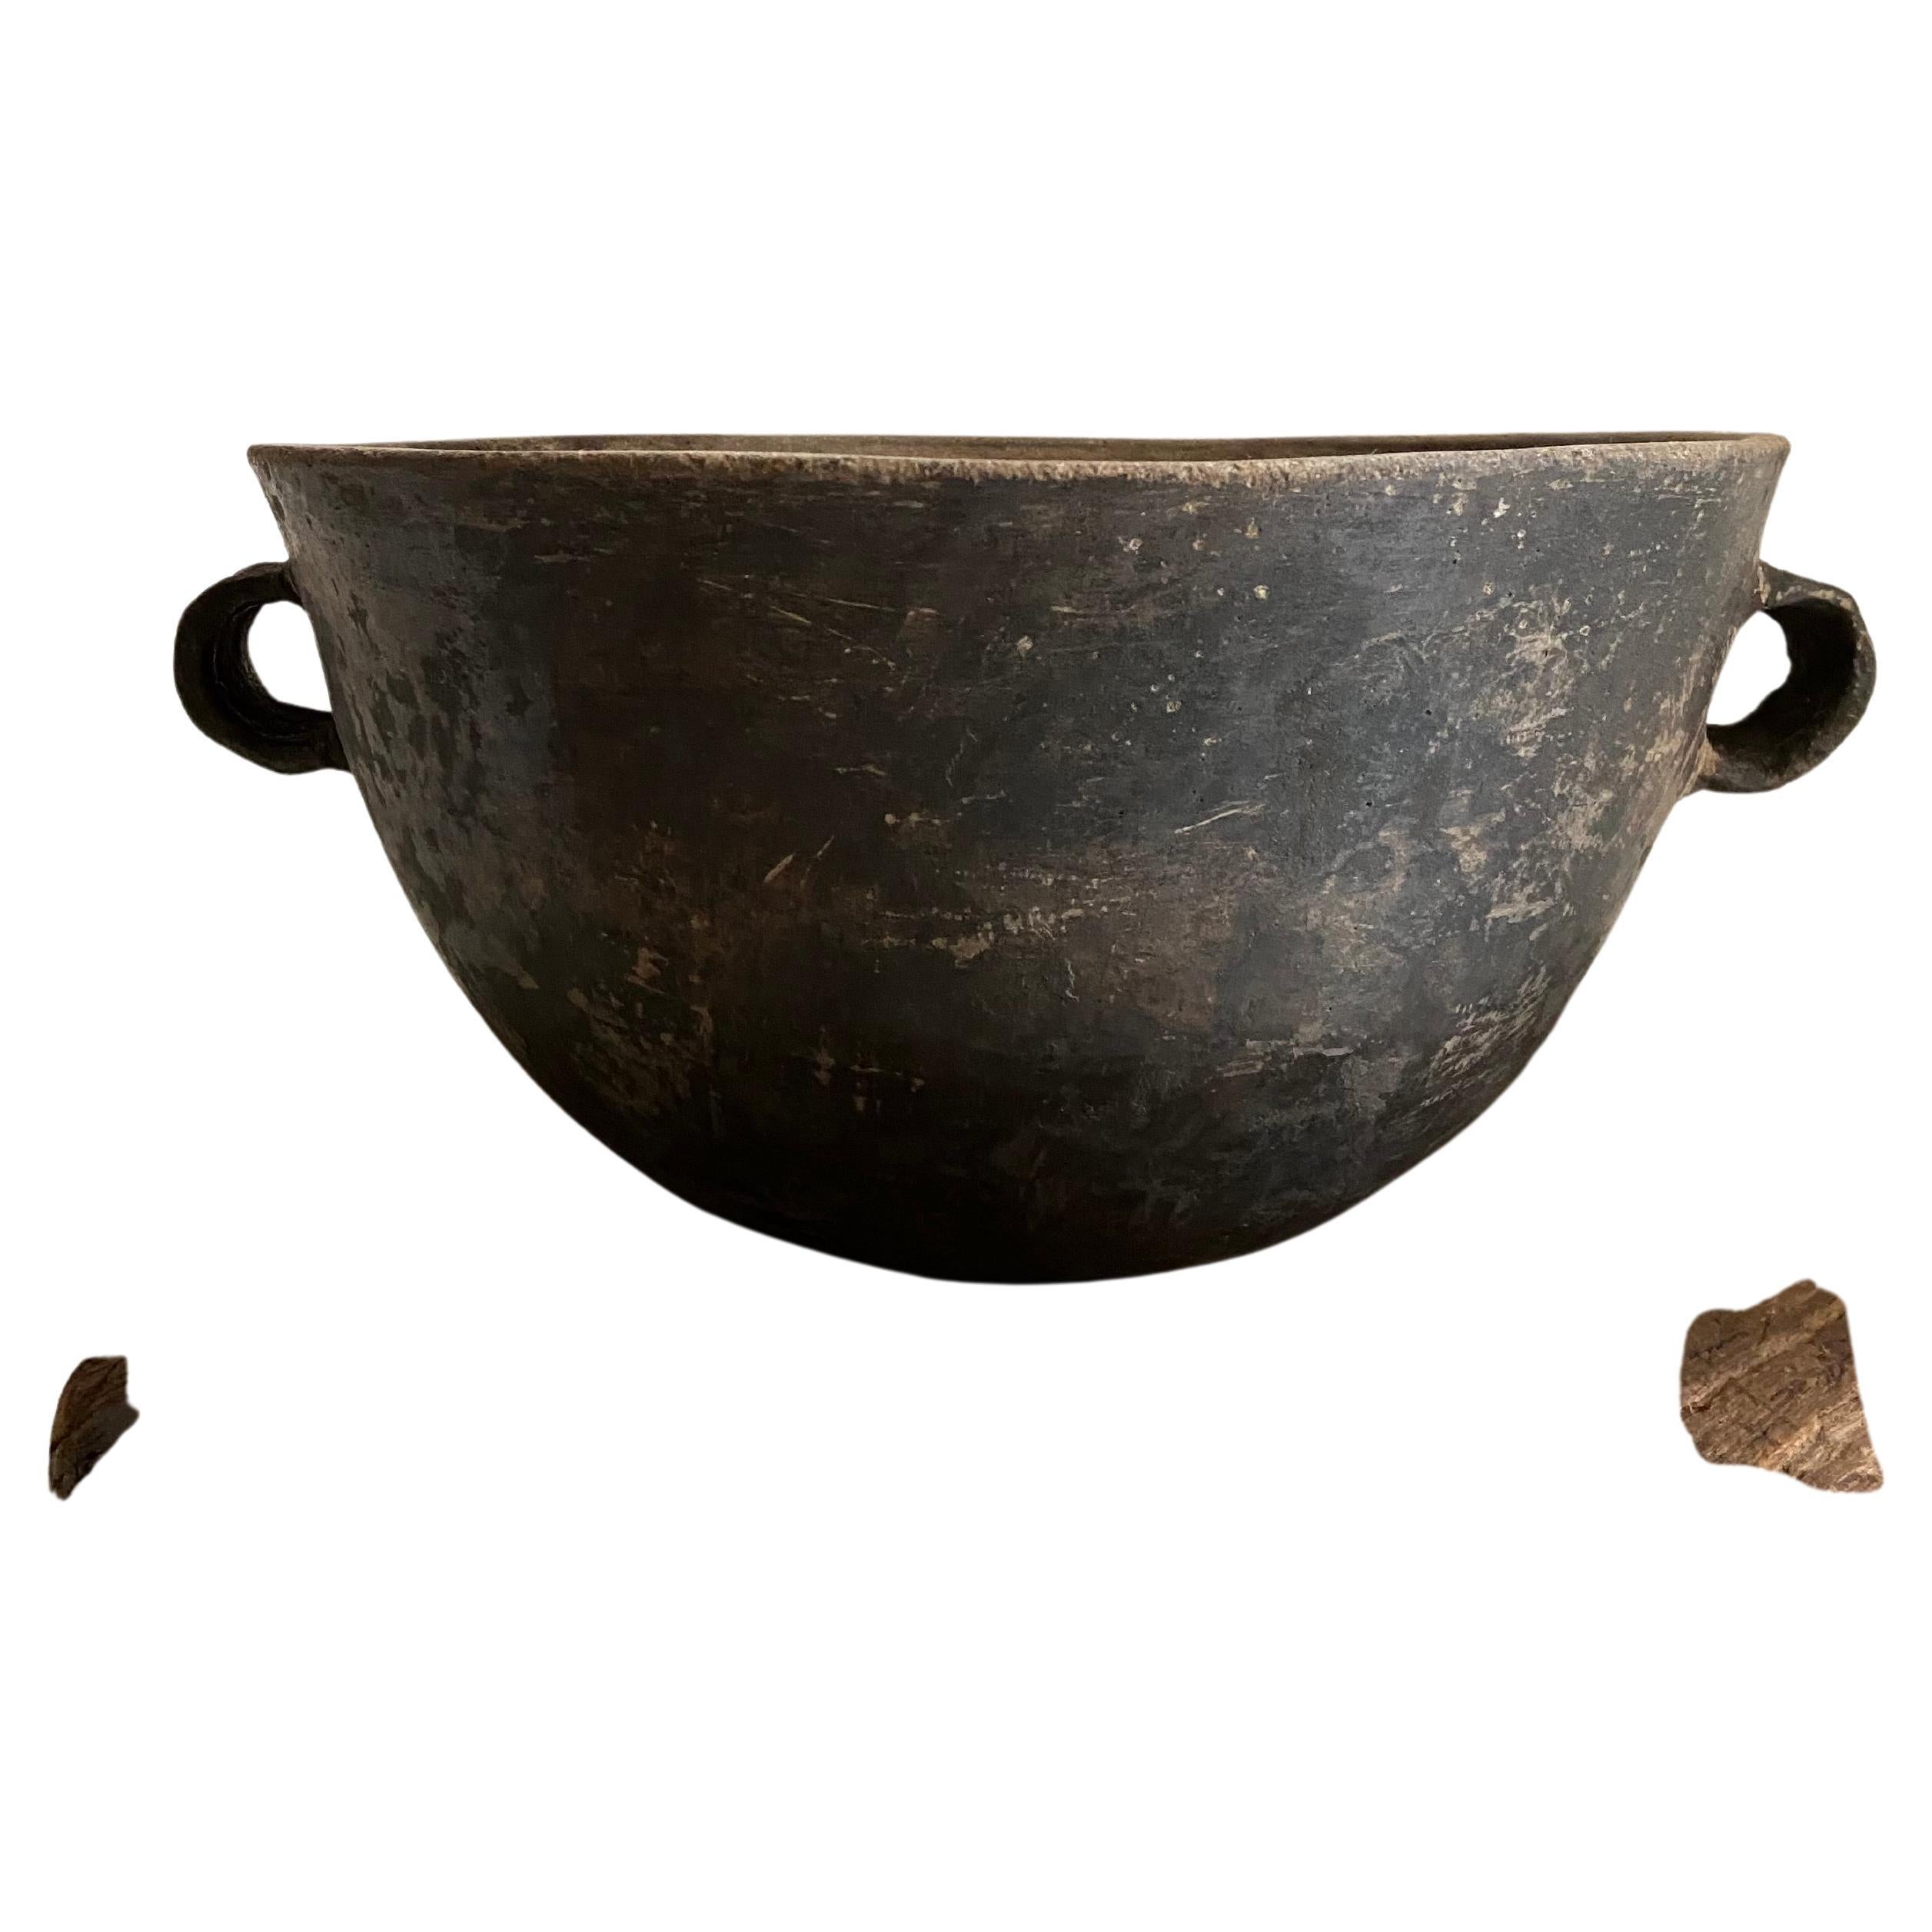 Primitive style cazuela bowl from Los Reyes Metzontla, Puebla (Mexico). The style of this vessel exemplifies the most primitive of the designs from this community.